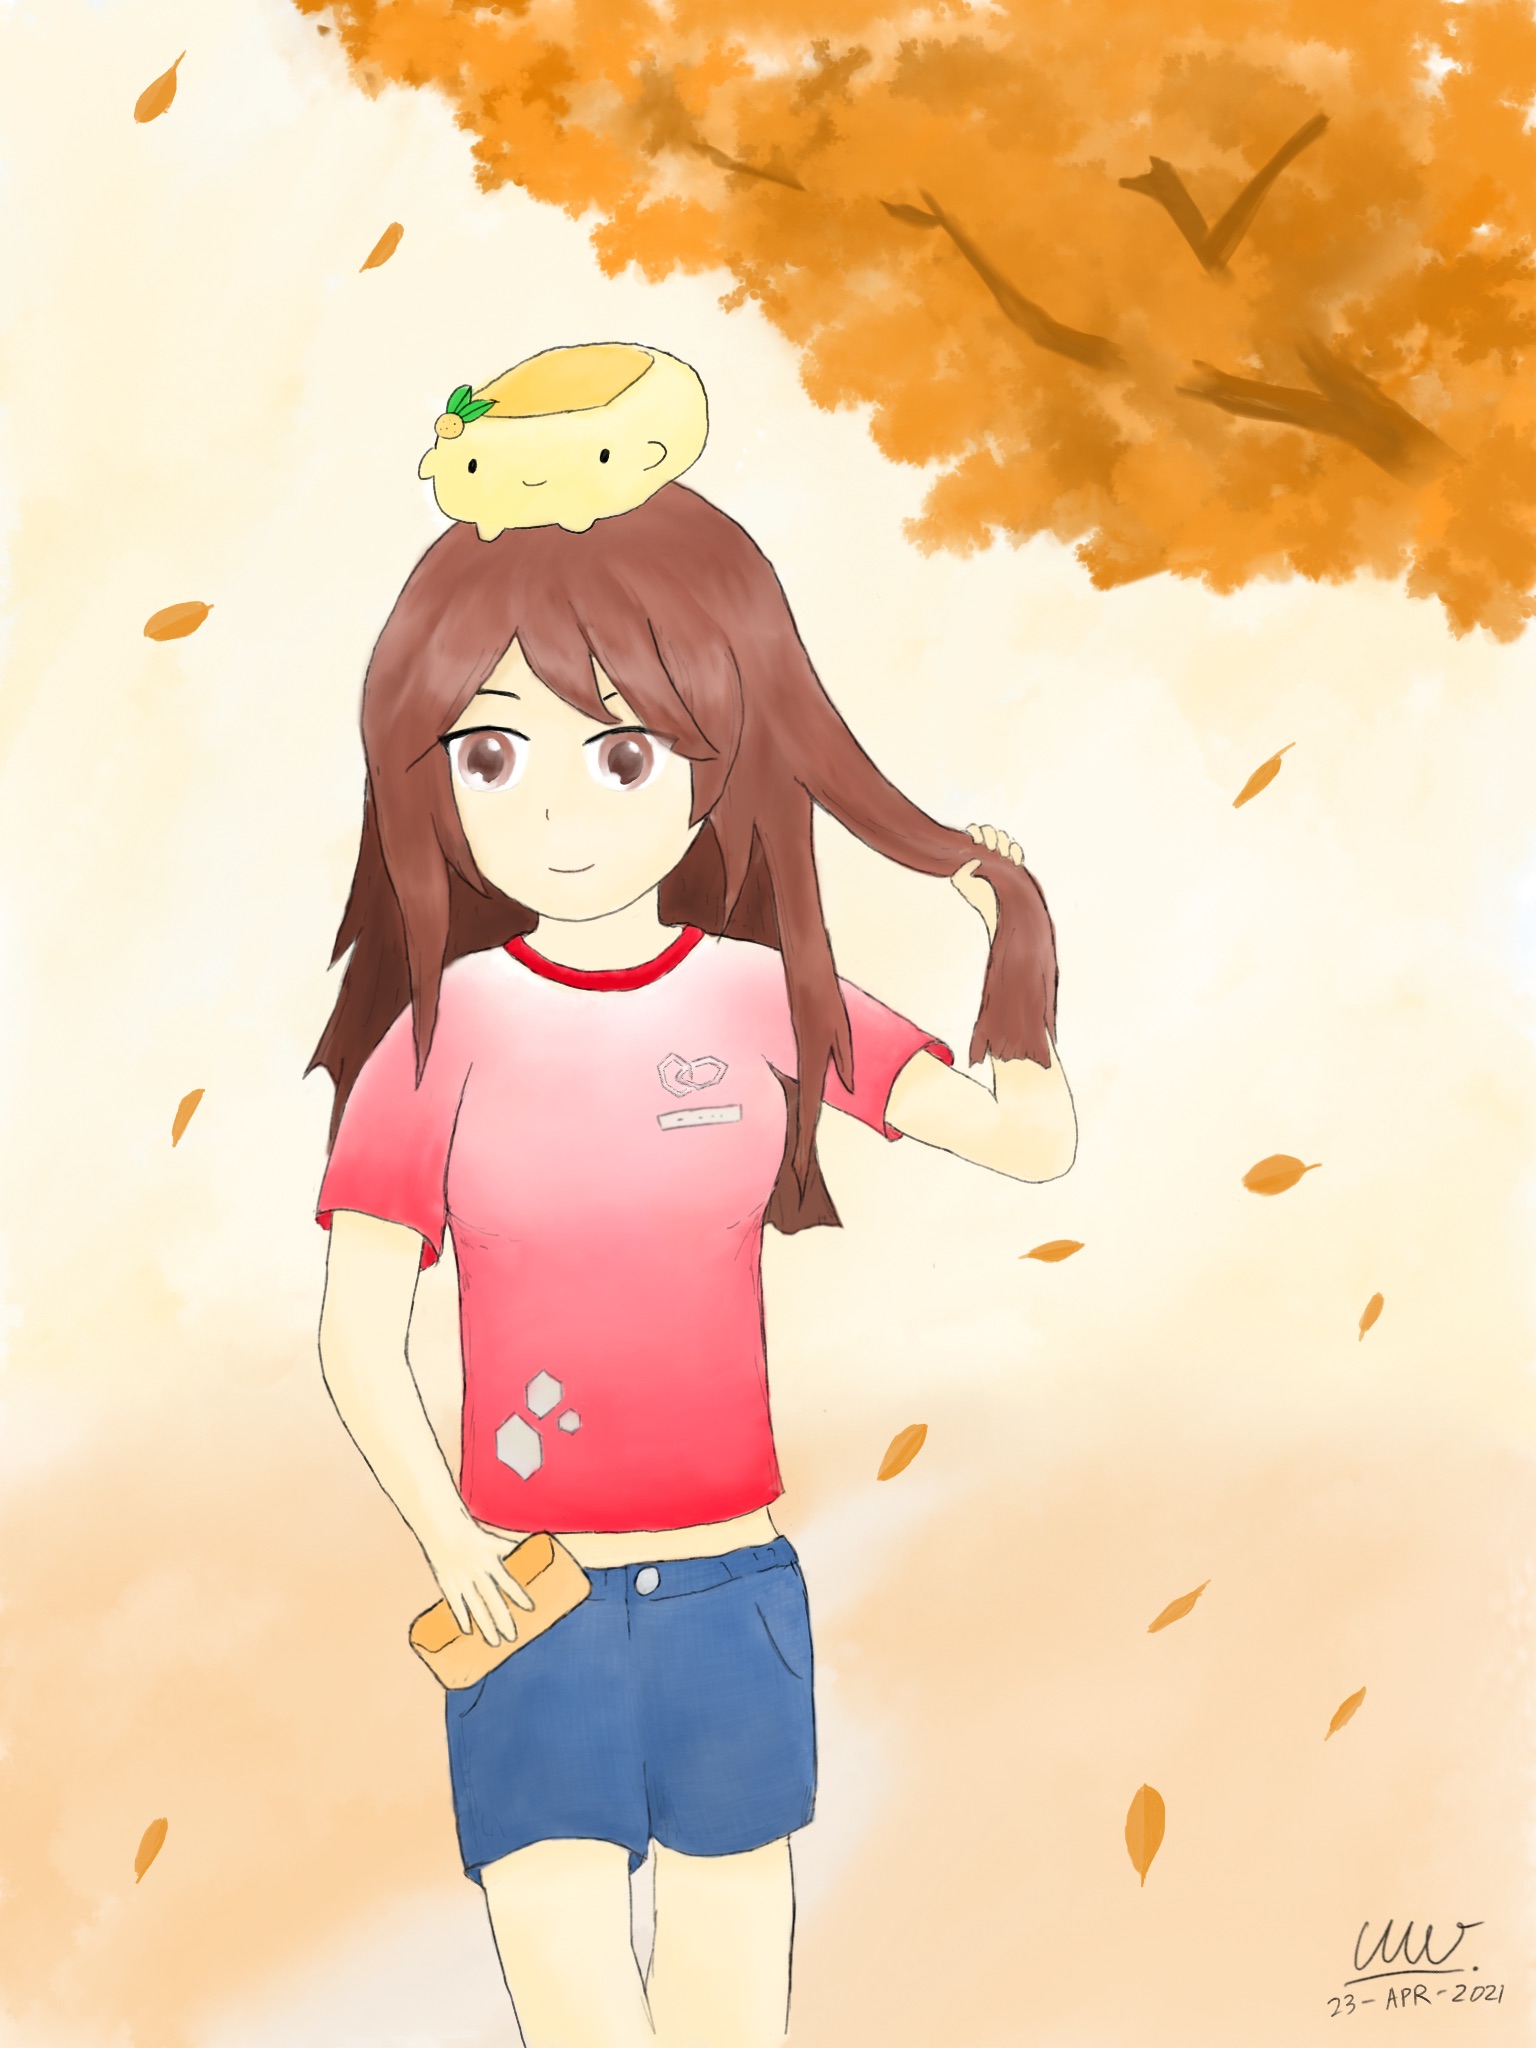 [Autumn Breeze - Artwork Image Description]: An e-watercolour painting featuring the portrait of a fictional girl standing under (and slightly in front of) a tree branch with autumn leaves. She appears to be fidgeting with her long, brown hair with her left hand, while leaves fall and flow with subtle winds blowing to her right. Wearing a red-white T-shirt with denim shorts, her right hand holds a purse-like item, while looking slightly off to her right. She also has a Yuzu Tofu plush toy on her head.